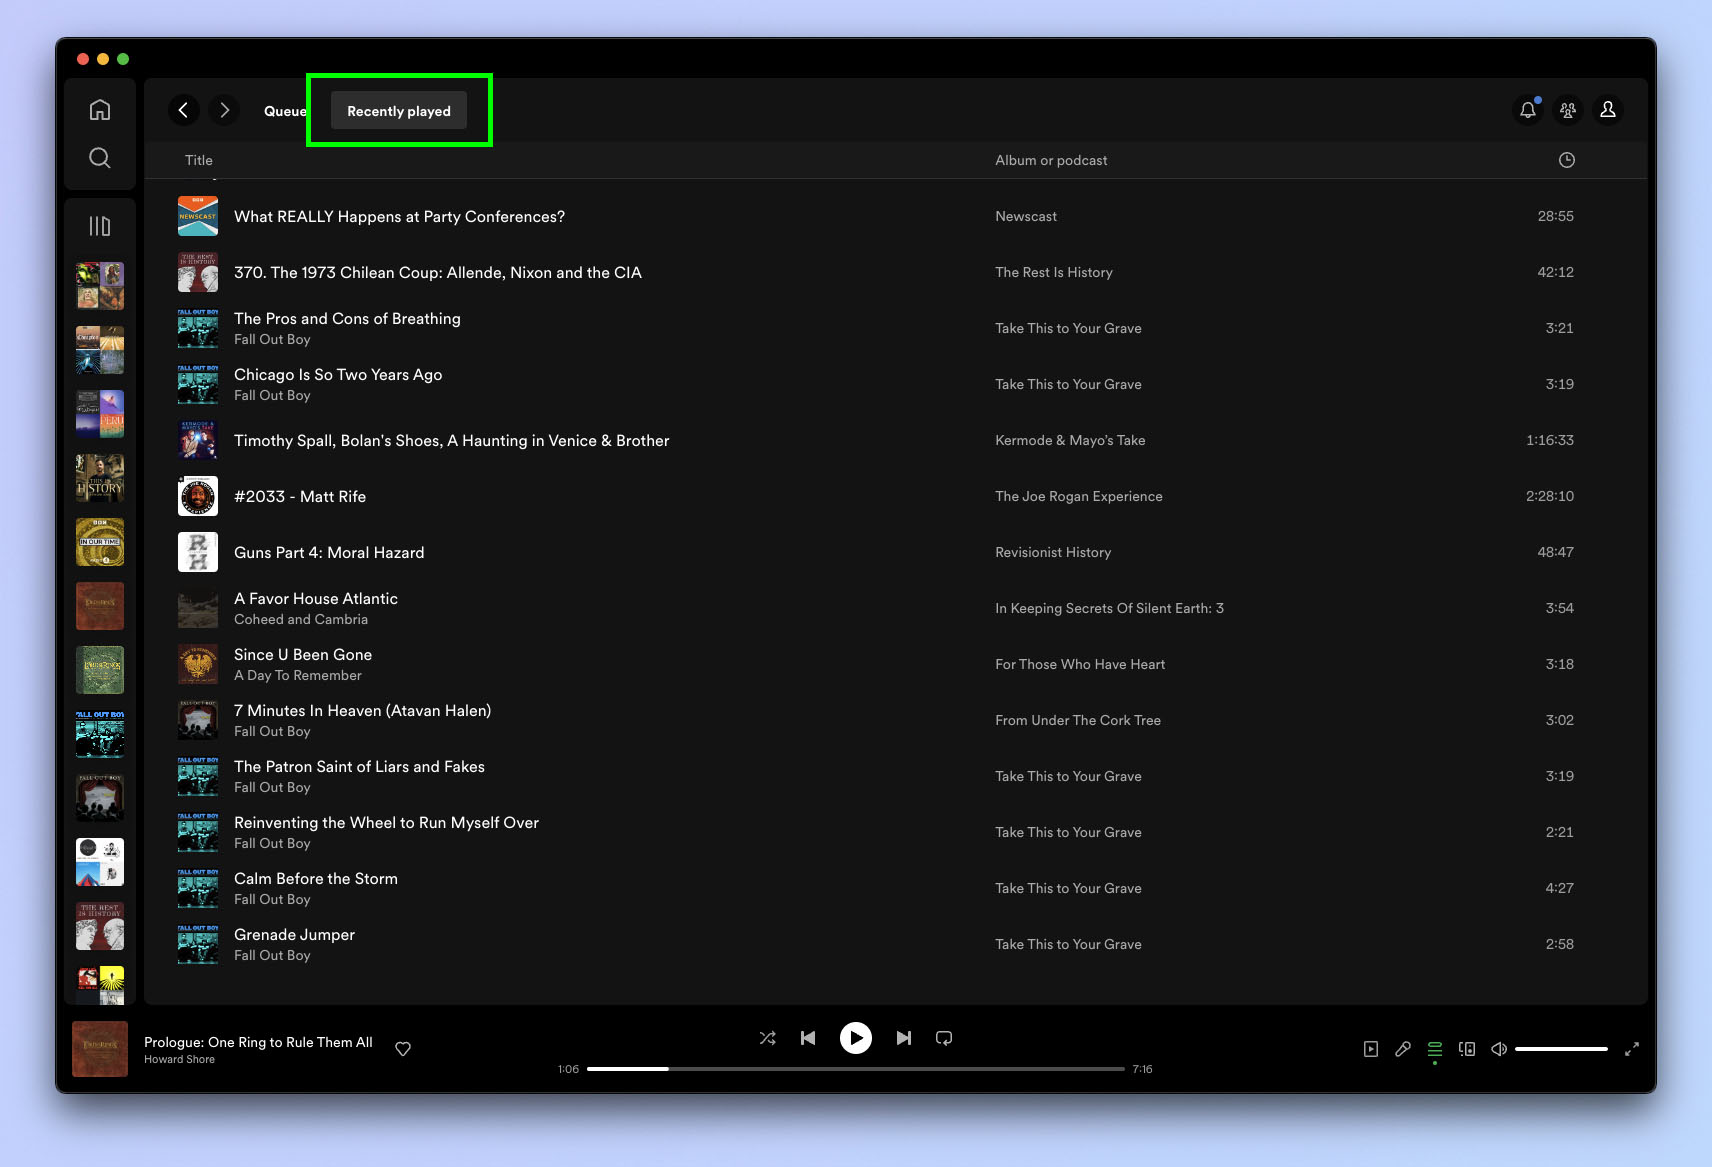 How to View Listening History on Spotify Desktop App